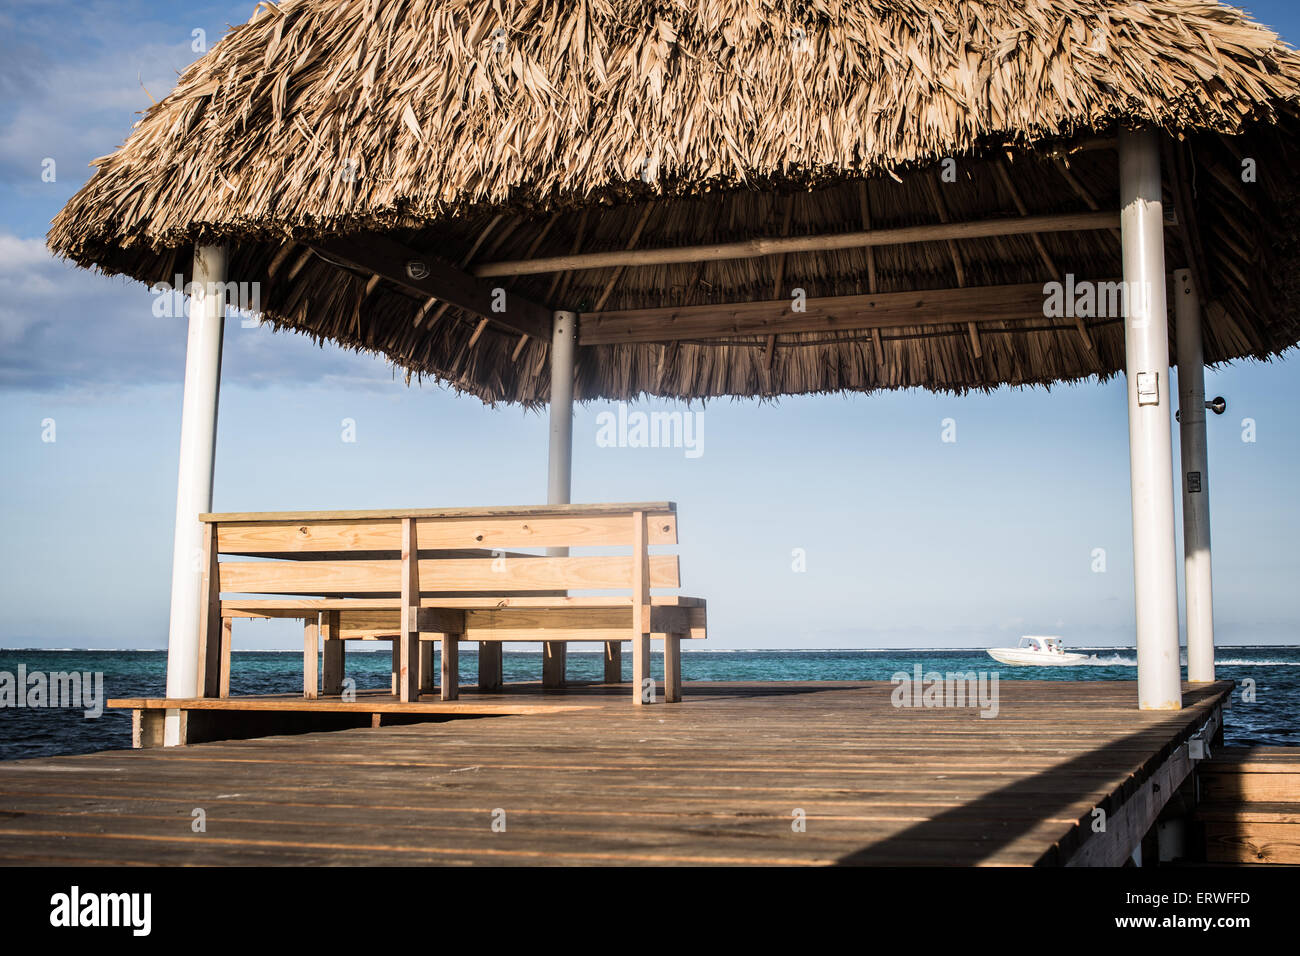 A Caribbean seat with a view. A Palapa and bench at the end of a dock with ocean views on the island of Ambergris Caye. Stock Photo